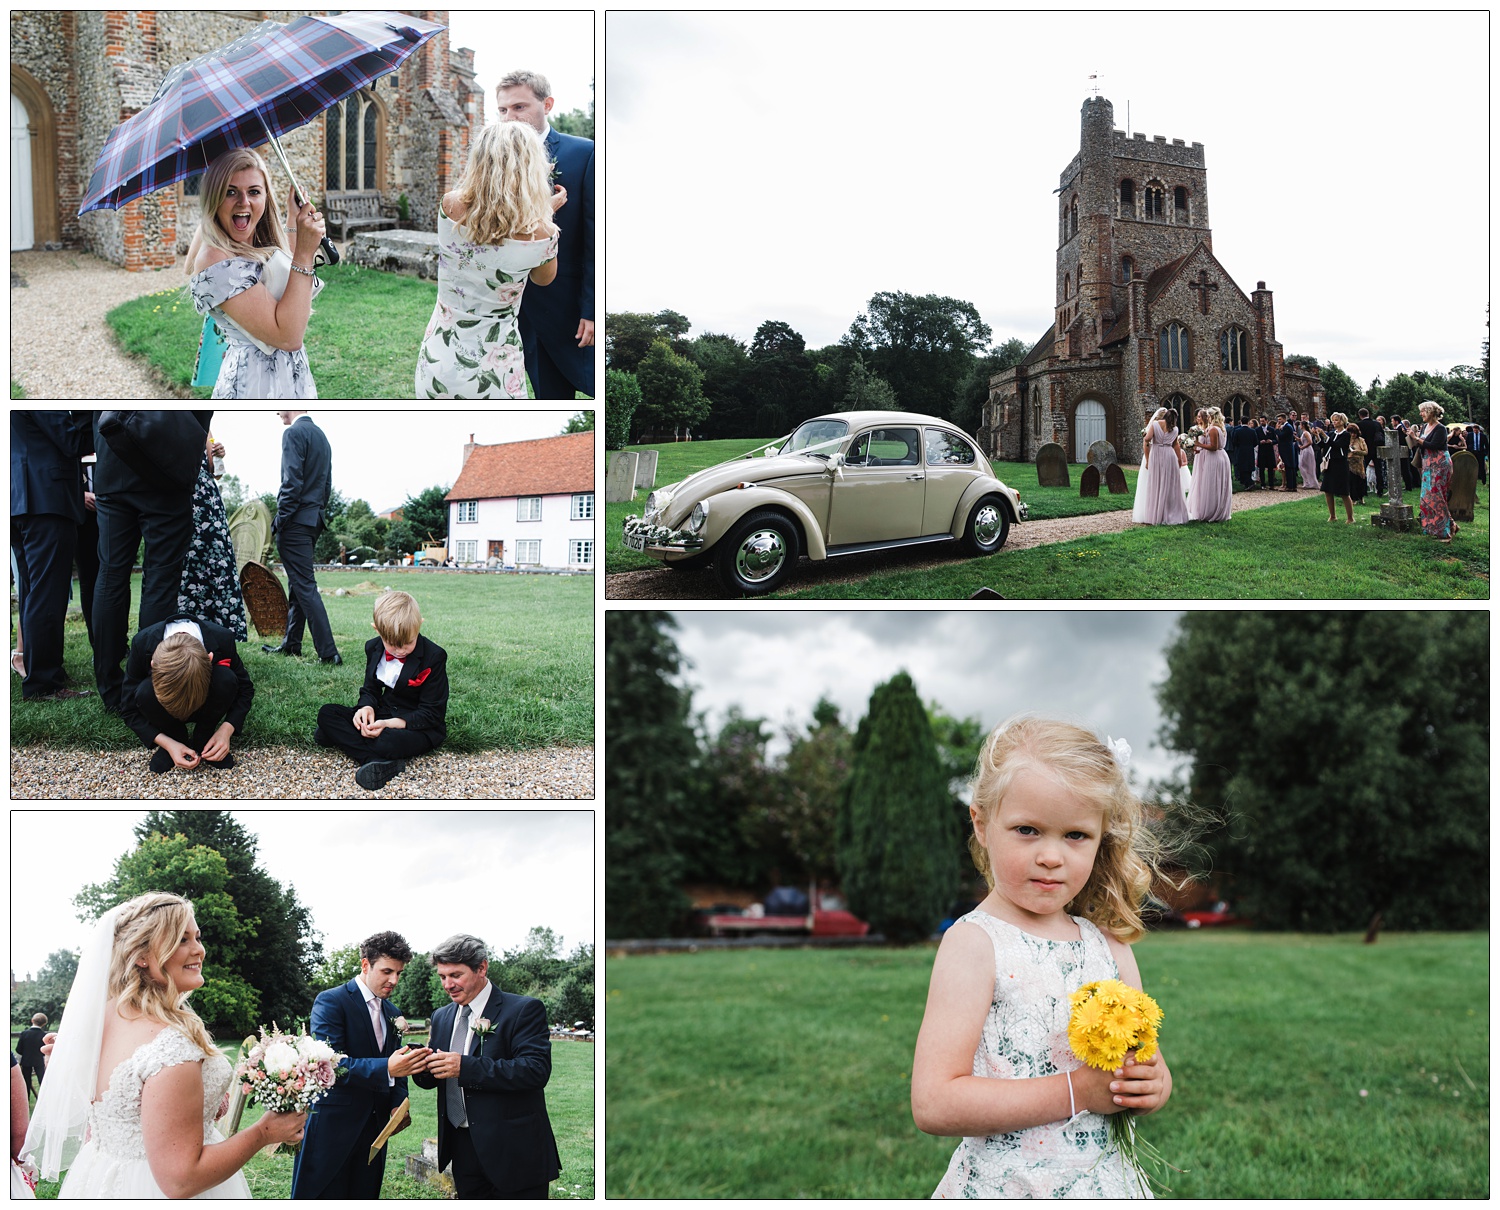 Young girl holding yellow flowers in a church graveyard. Guests outside St Barnabas church in Great Tey. There is a beige 1968 Volkswagen Beetle wedding car..